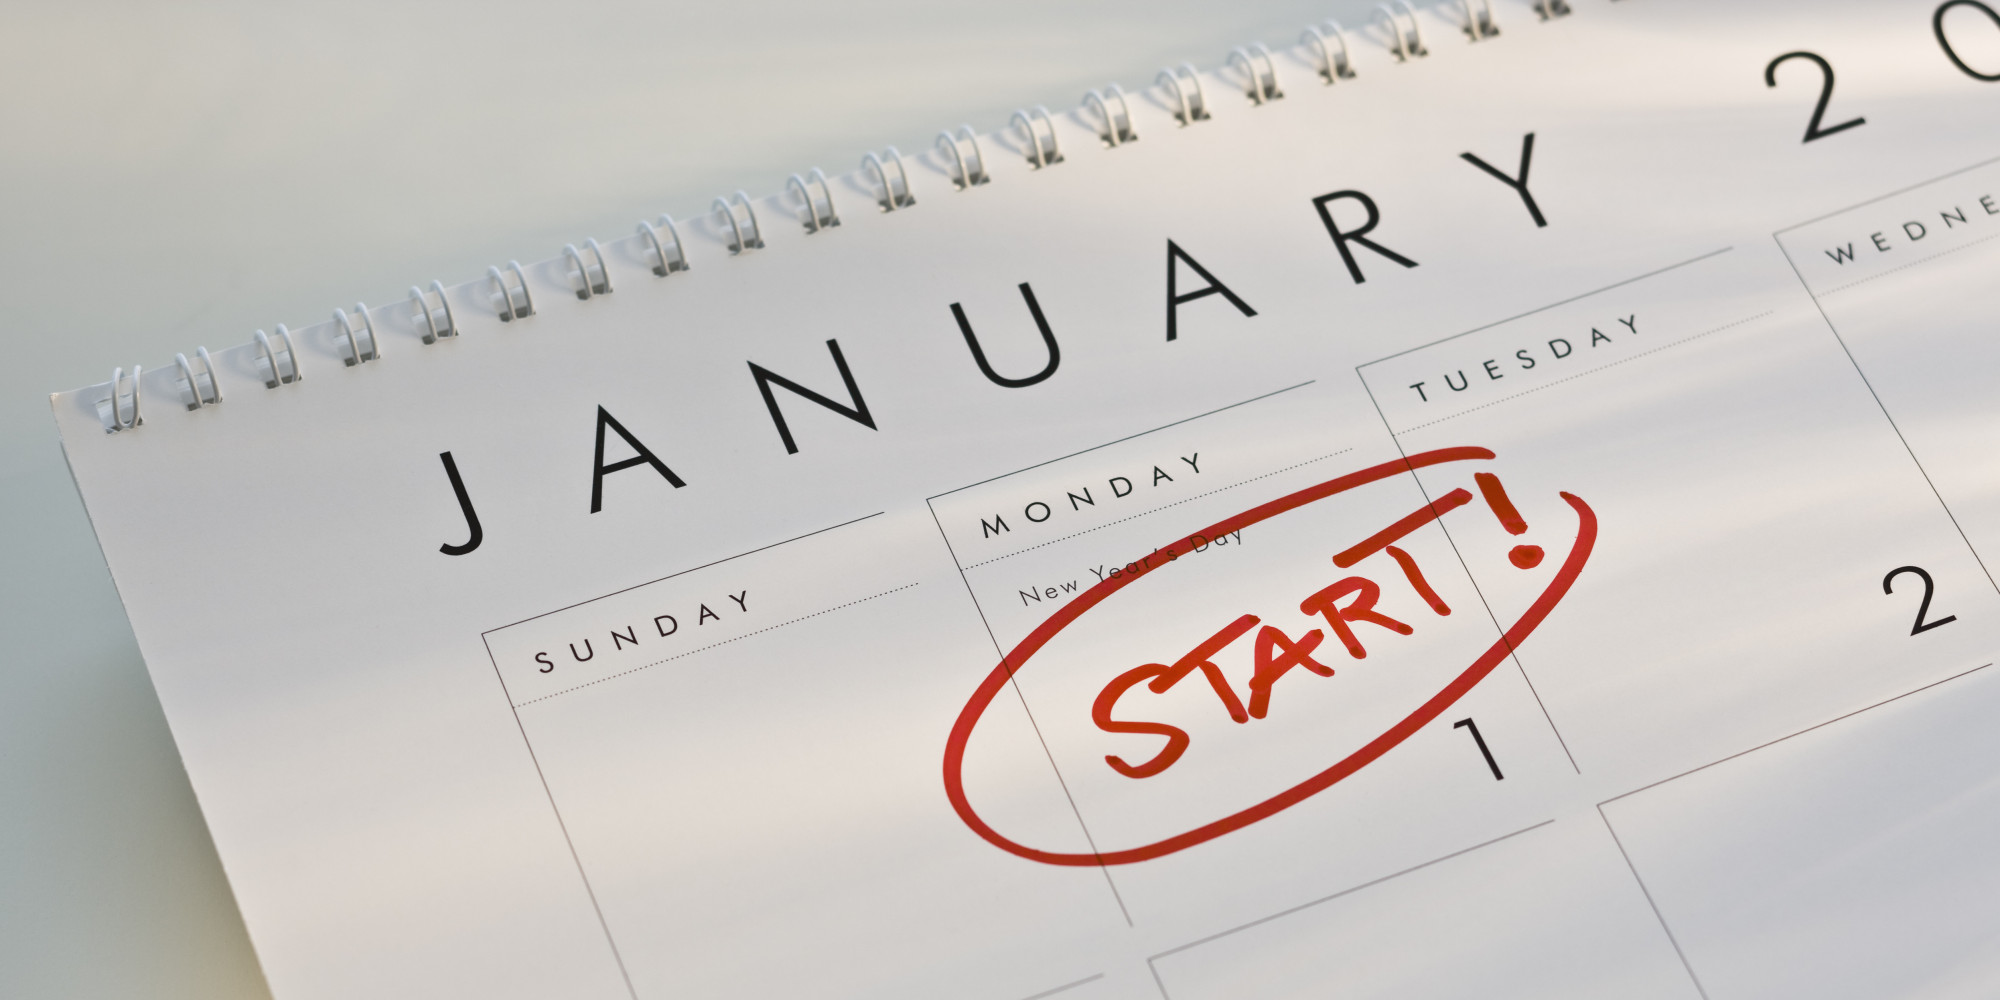 New Year’s resolutions for the Millennial Entrepreneur